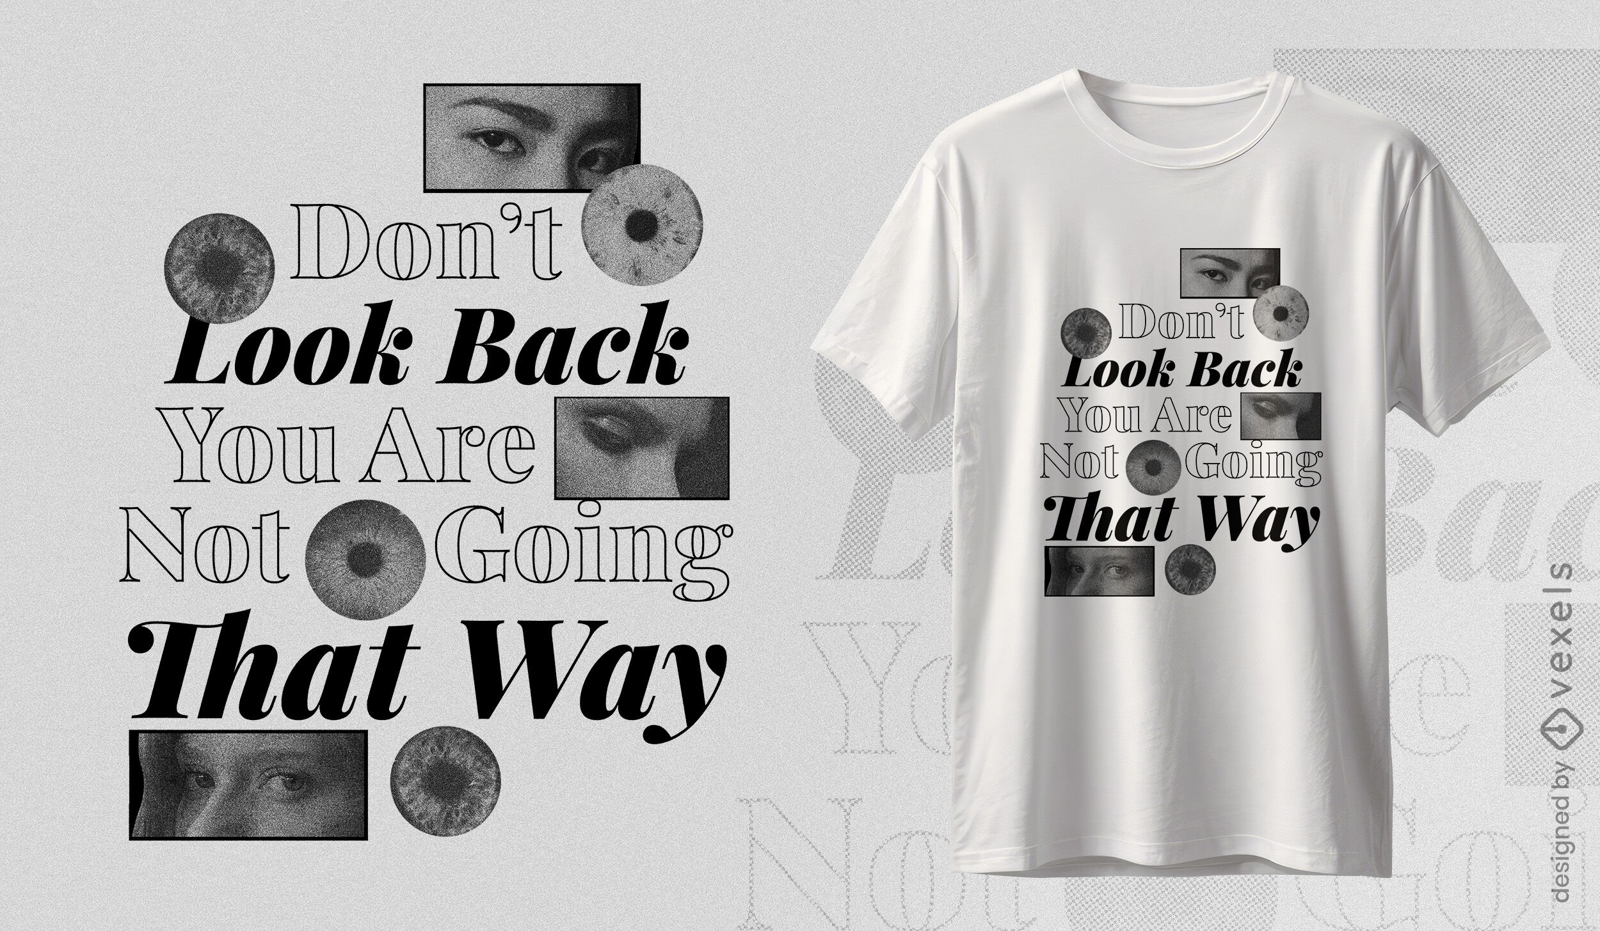 Don't look back quote t-shirt design